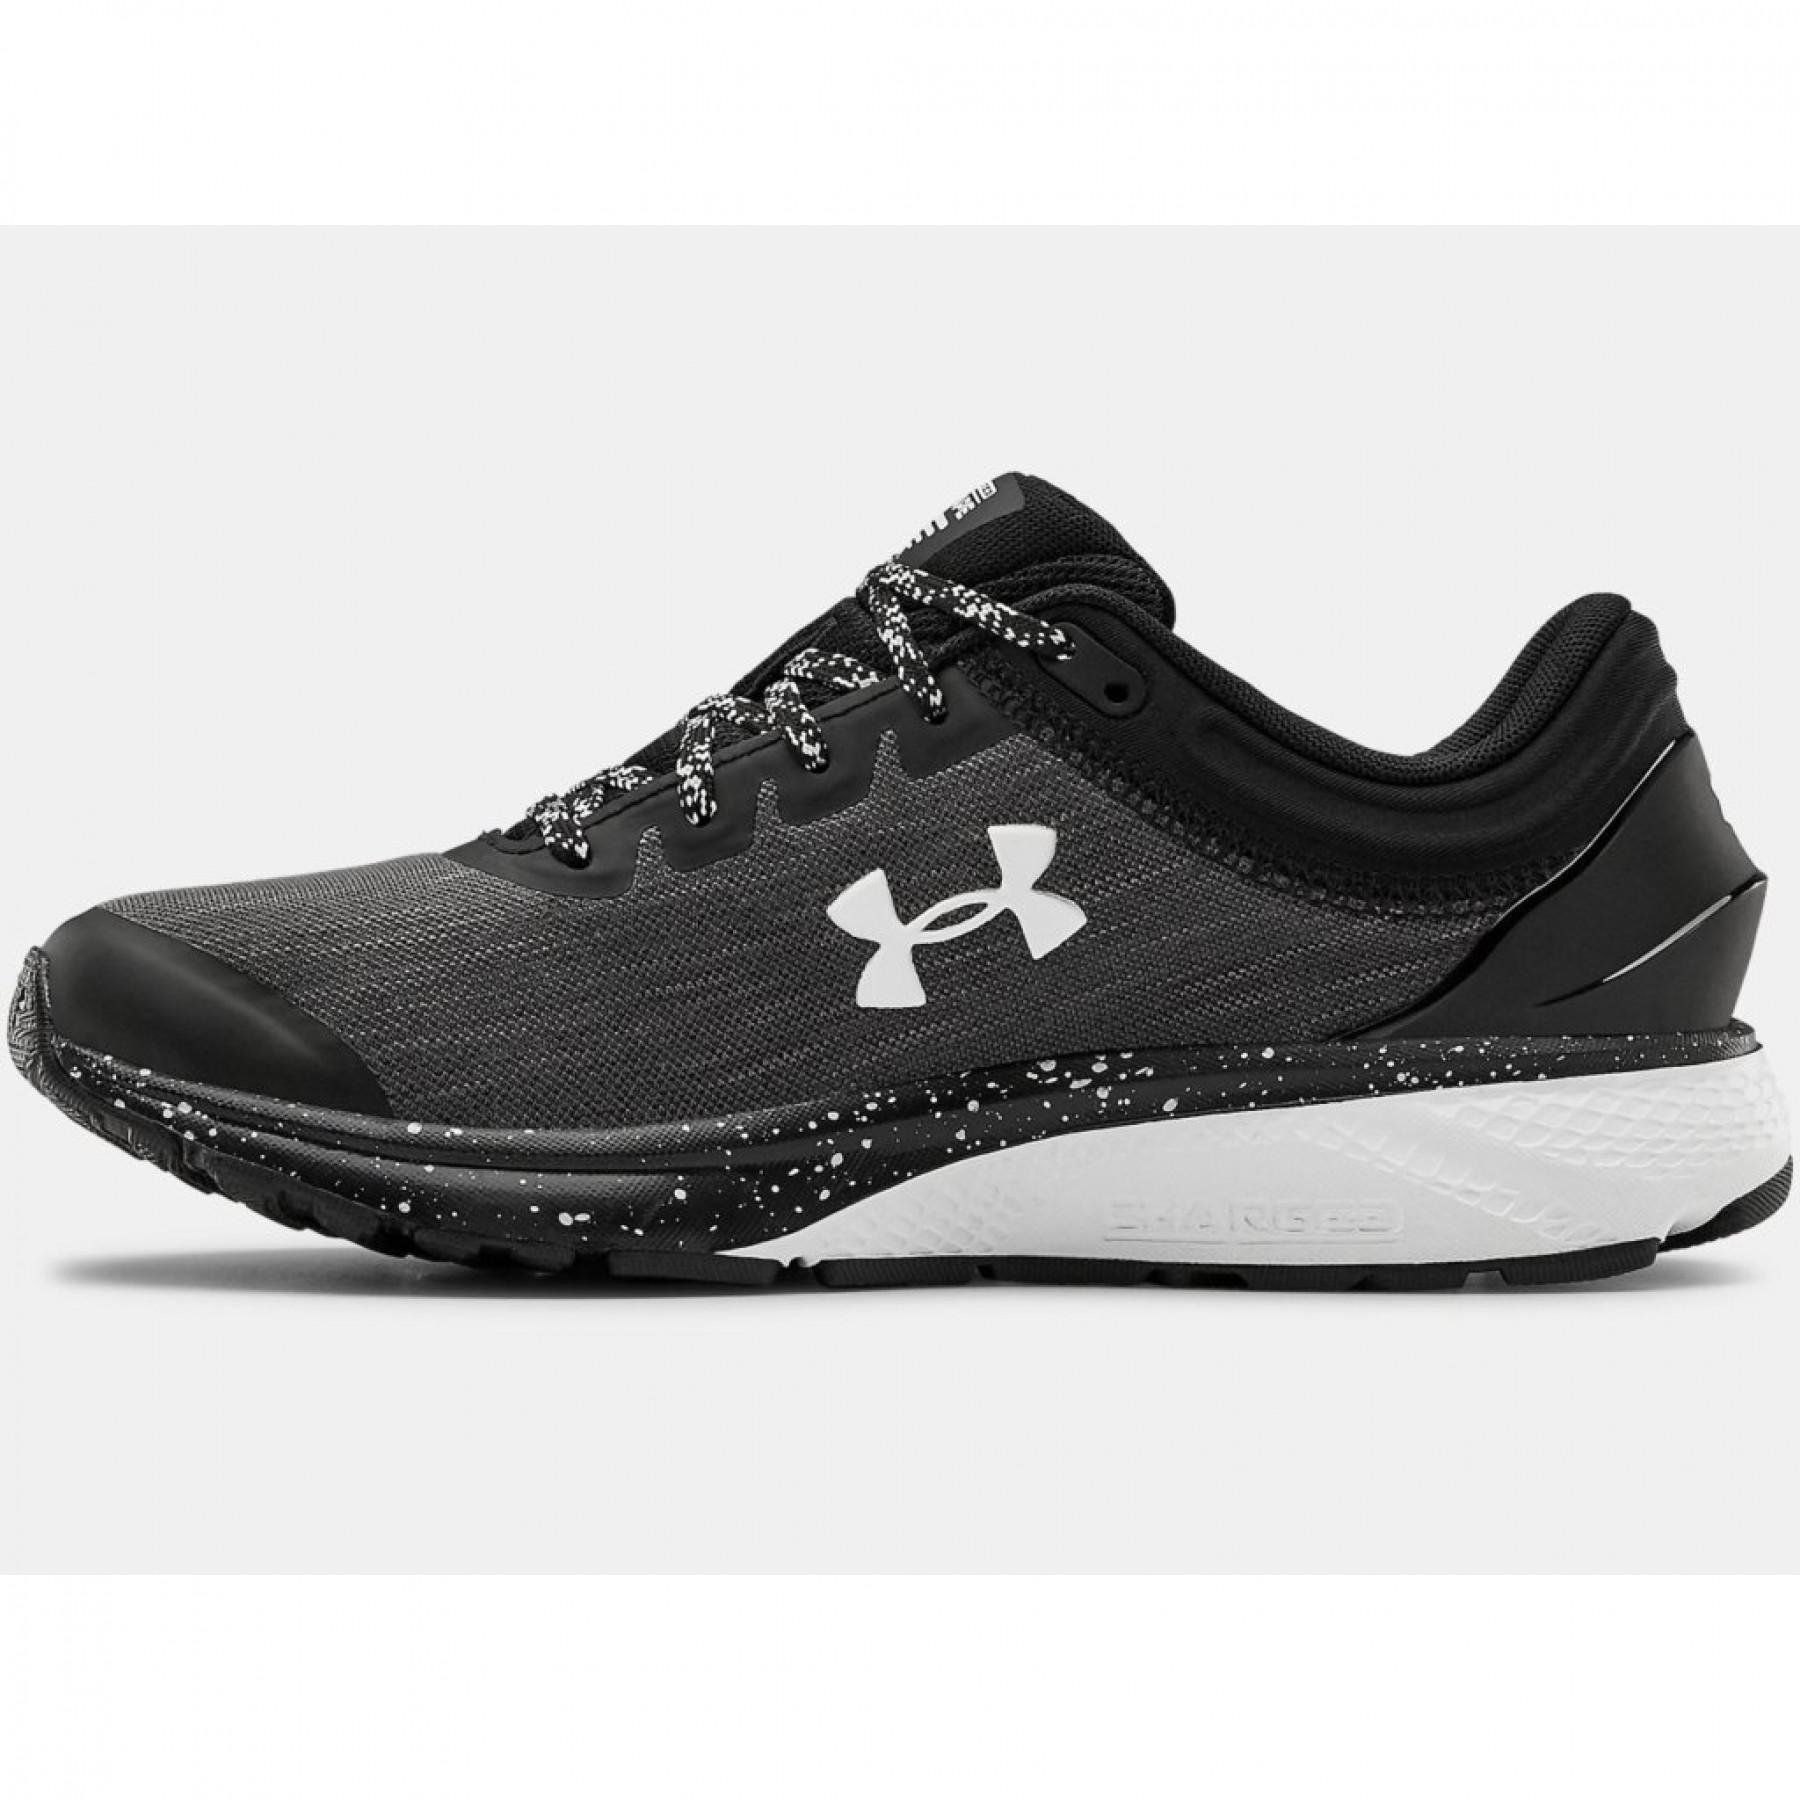 Chaussures de running femme Under Armour Charged Escape 3 Evo